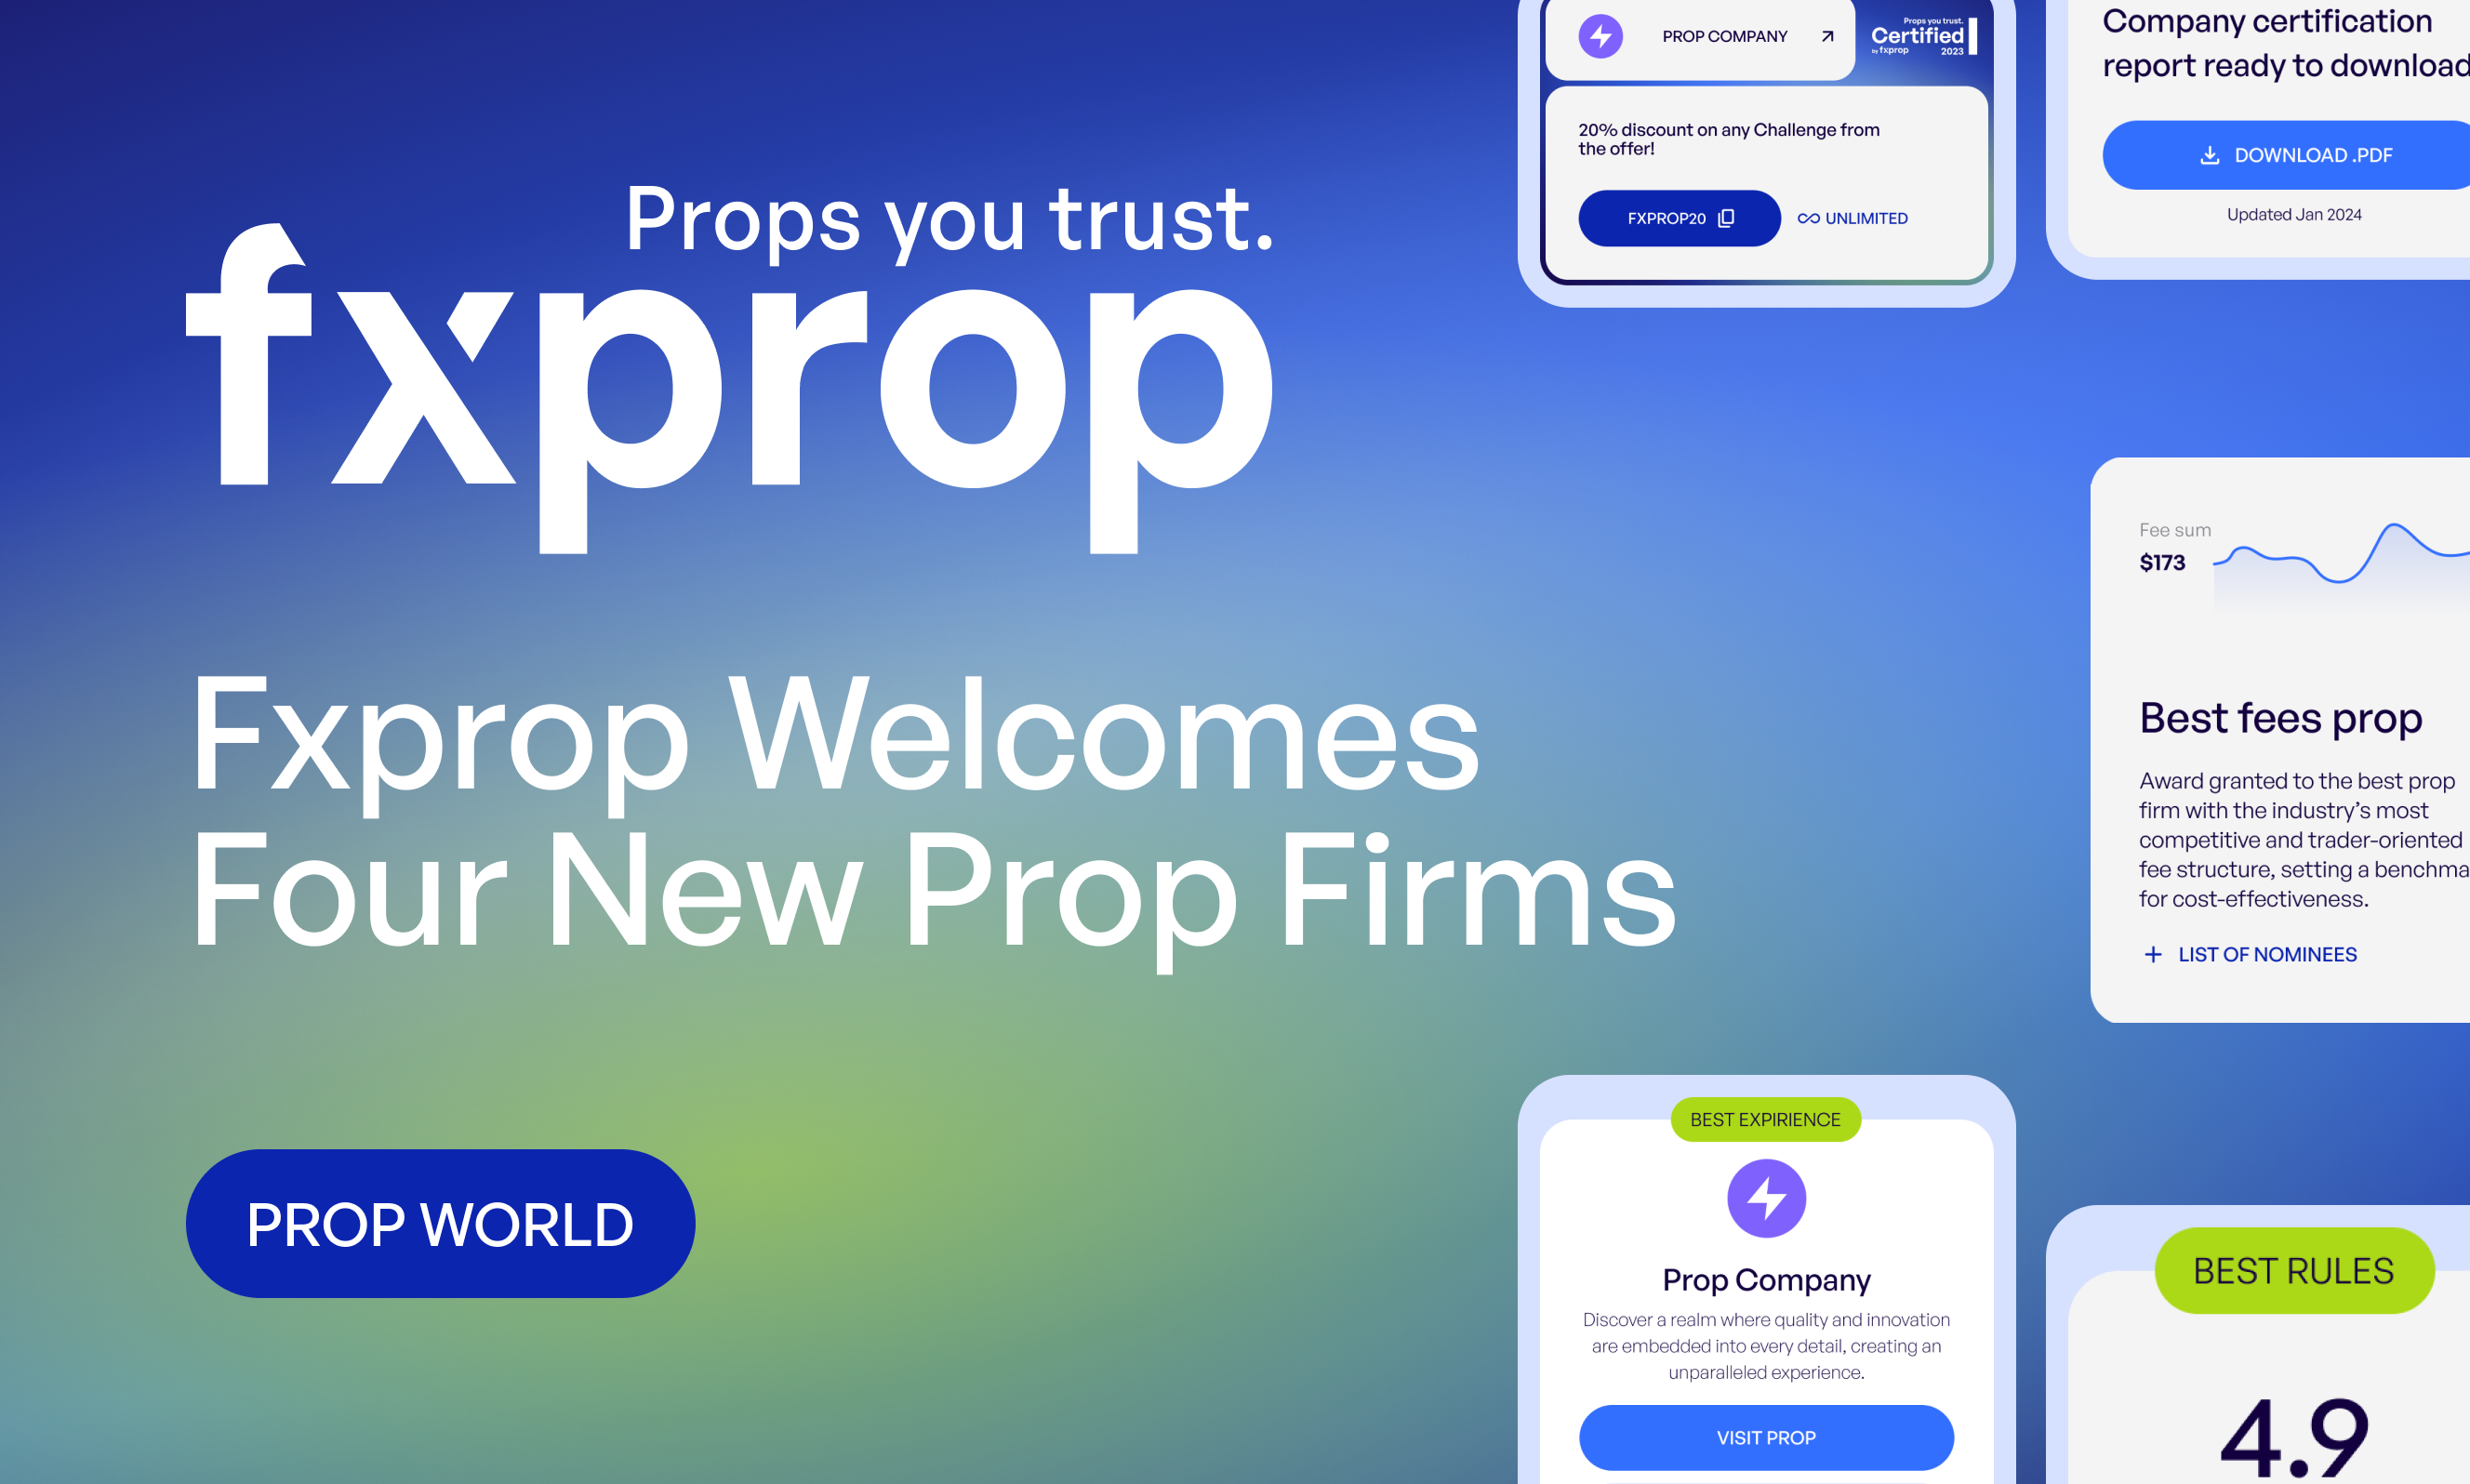 Fxprop Welcomes Four New Prop Firms: AudaCity Capital, City Traders Imperium, Monevis Funding, MyFlashFunding